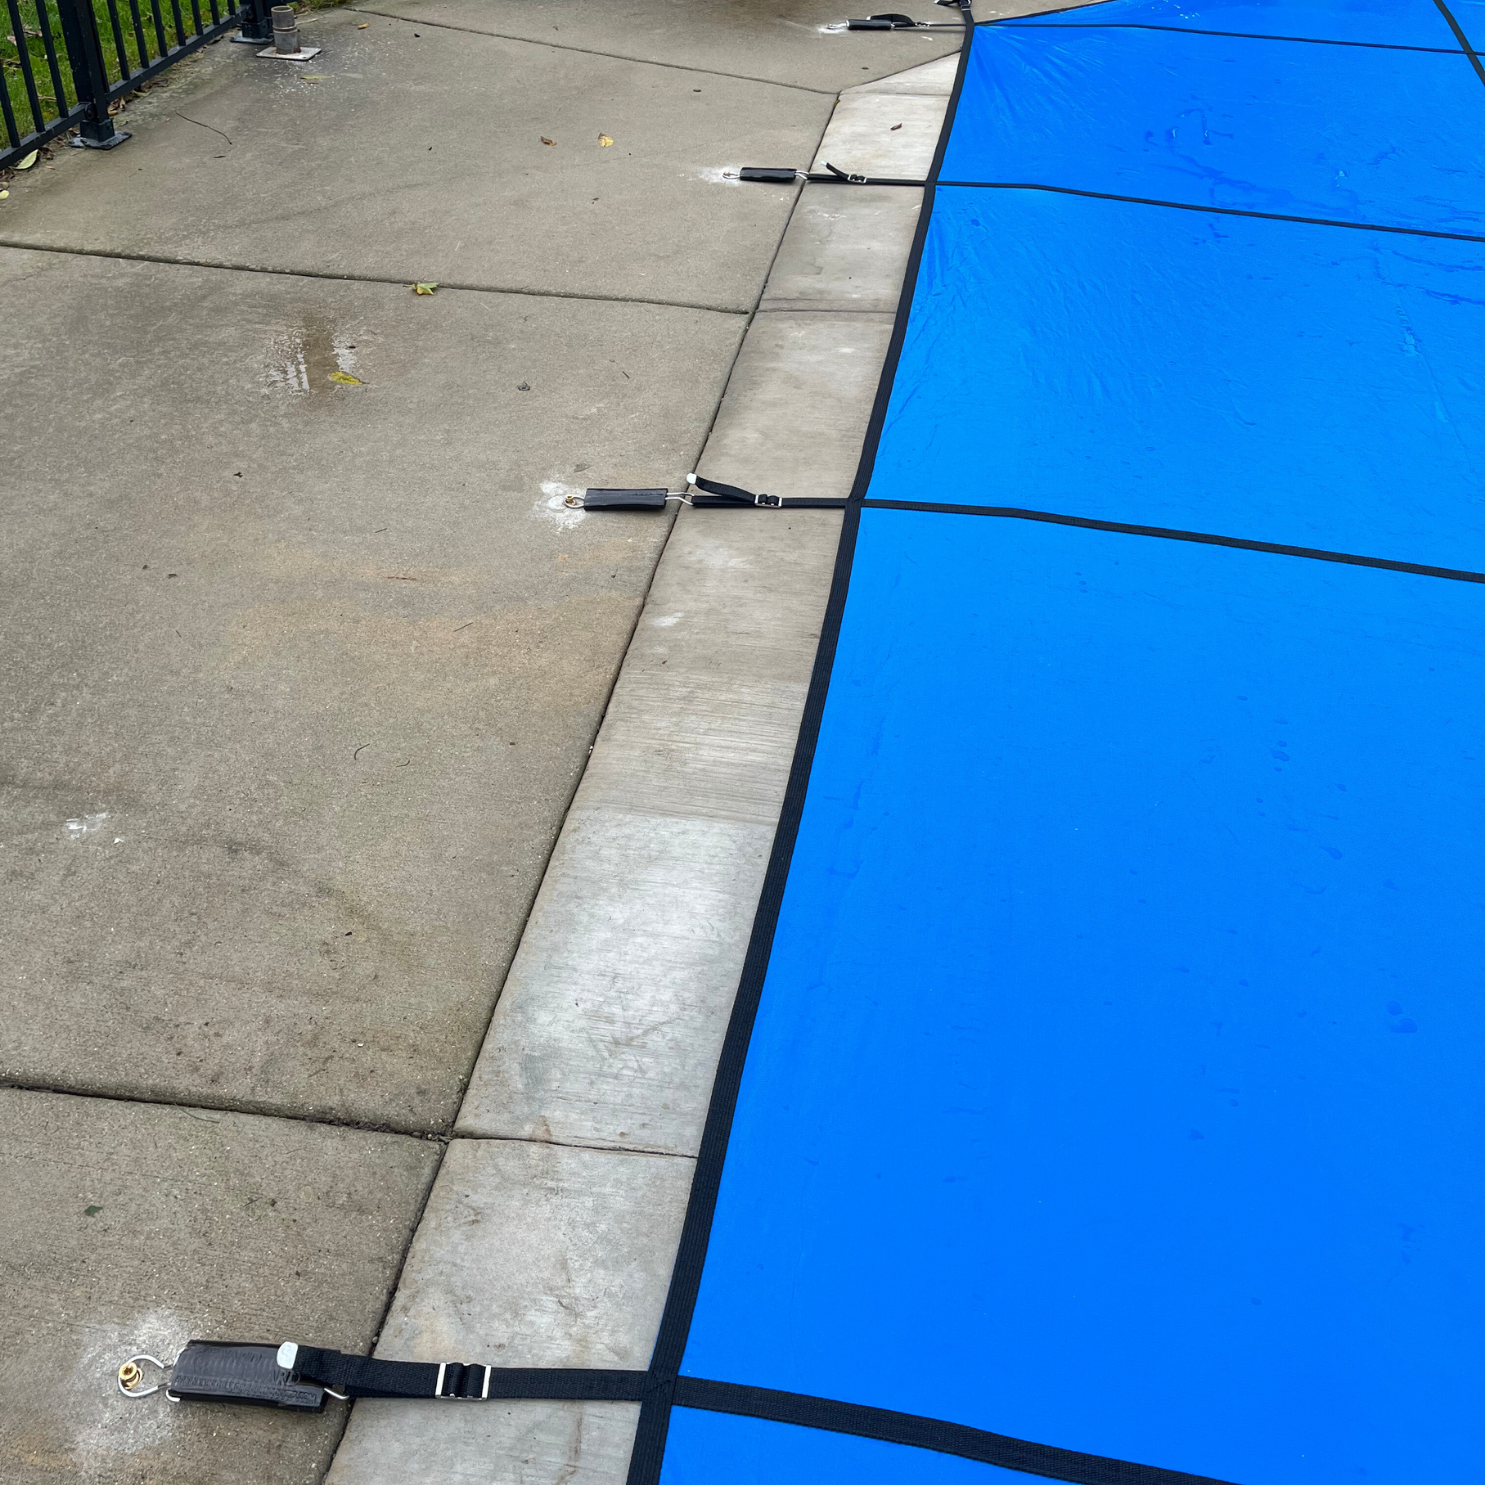 18' x 36' Rectangle Aquamaster 100% Solid Safety Pool Cover